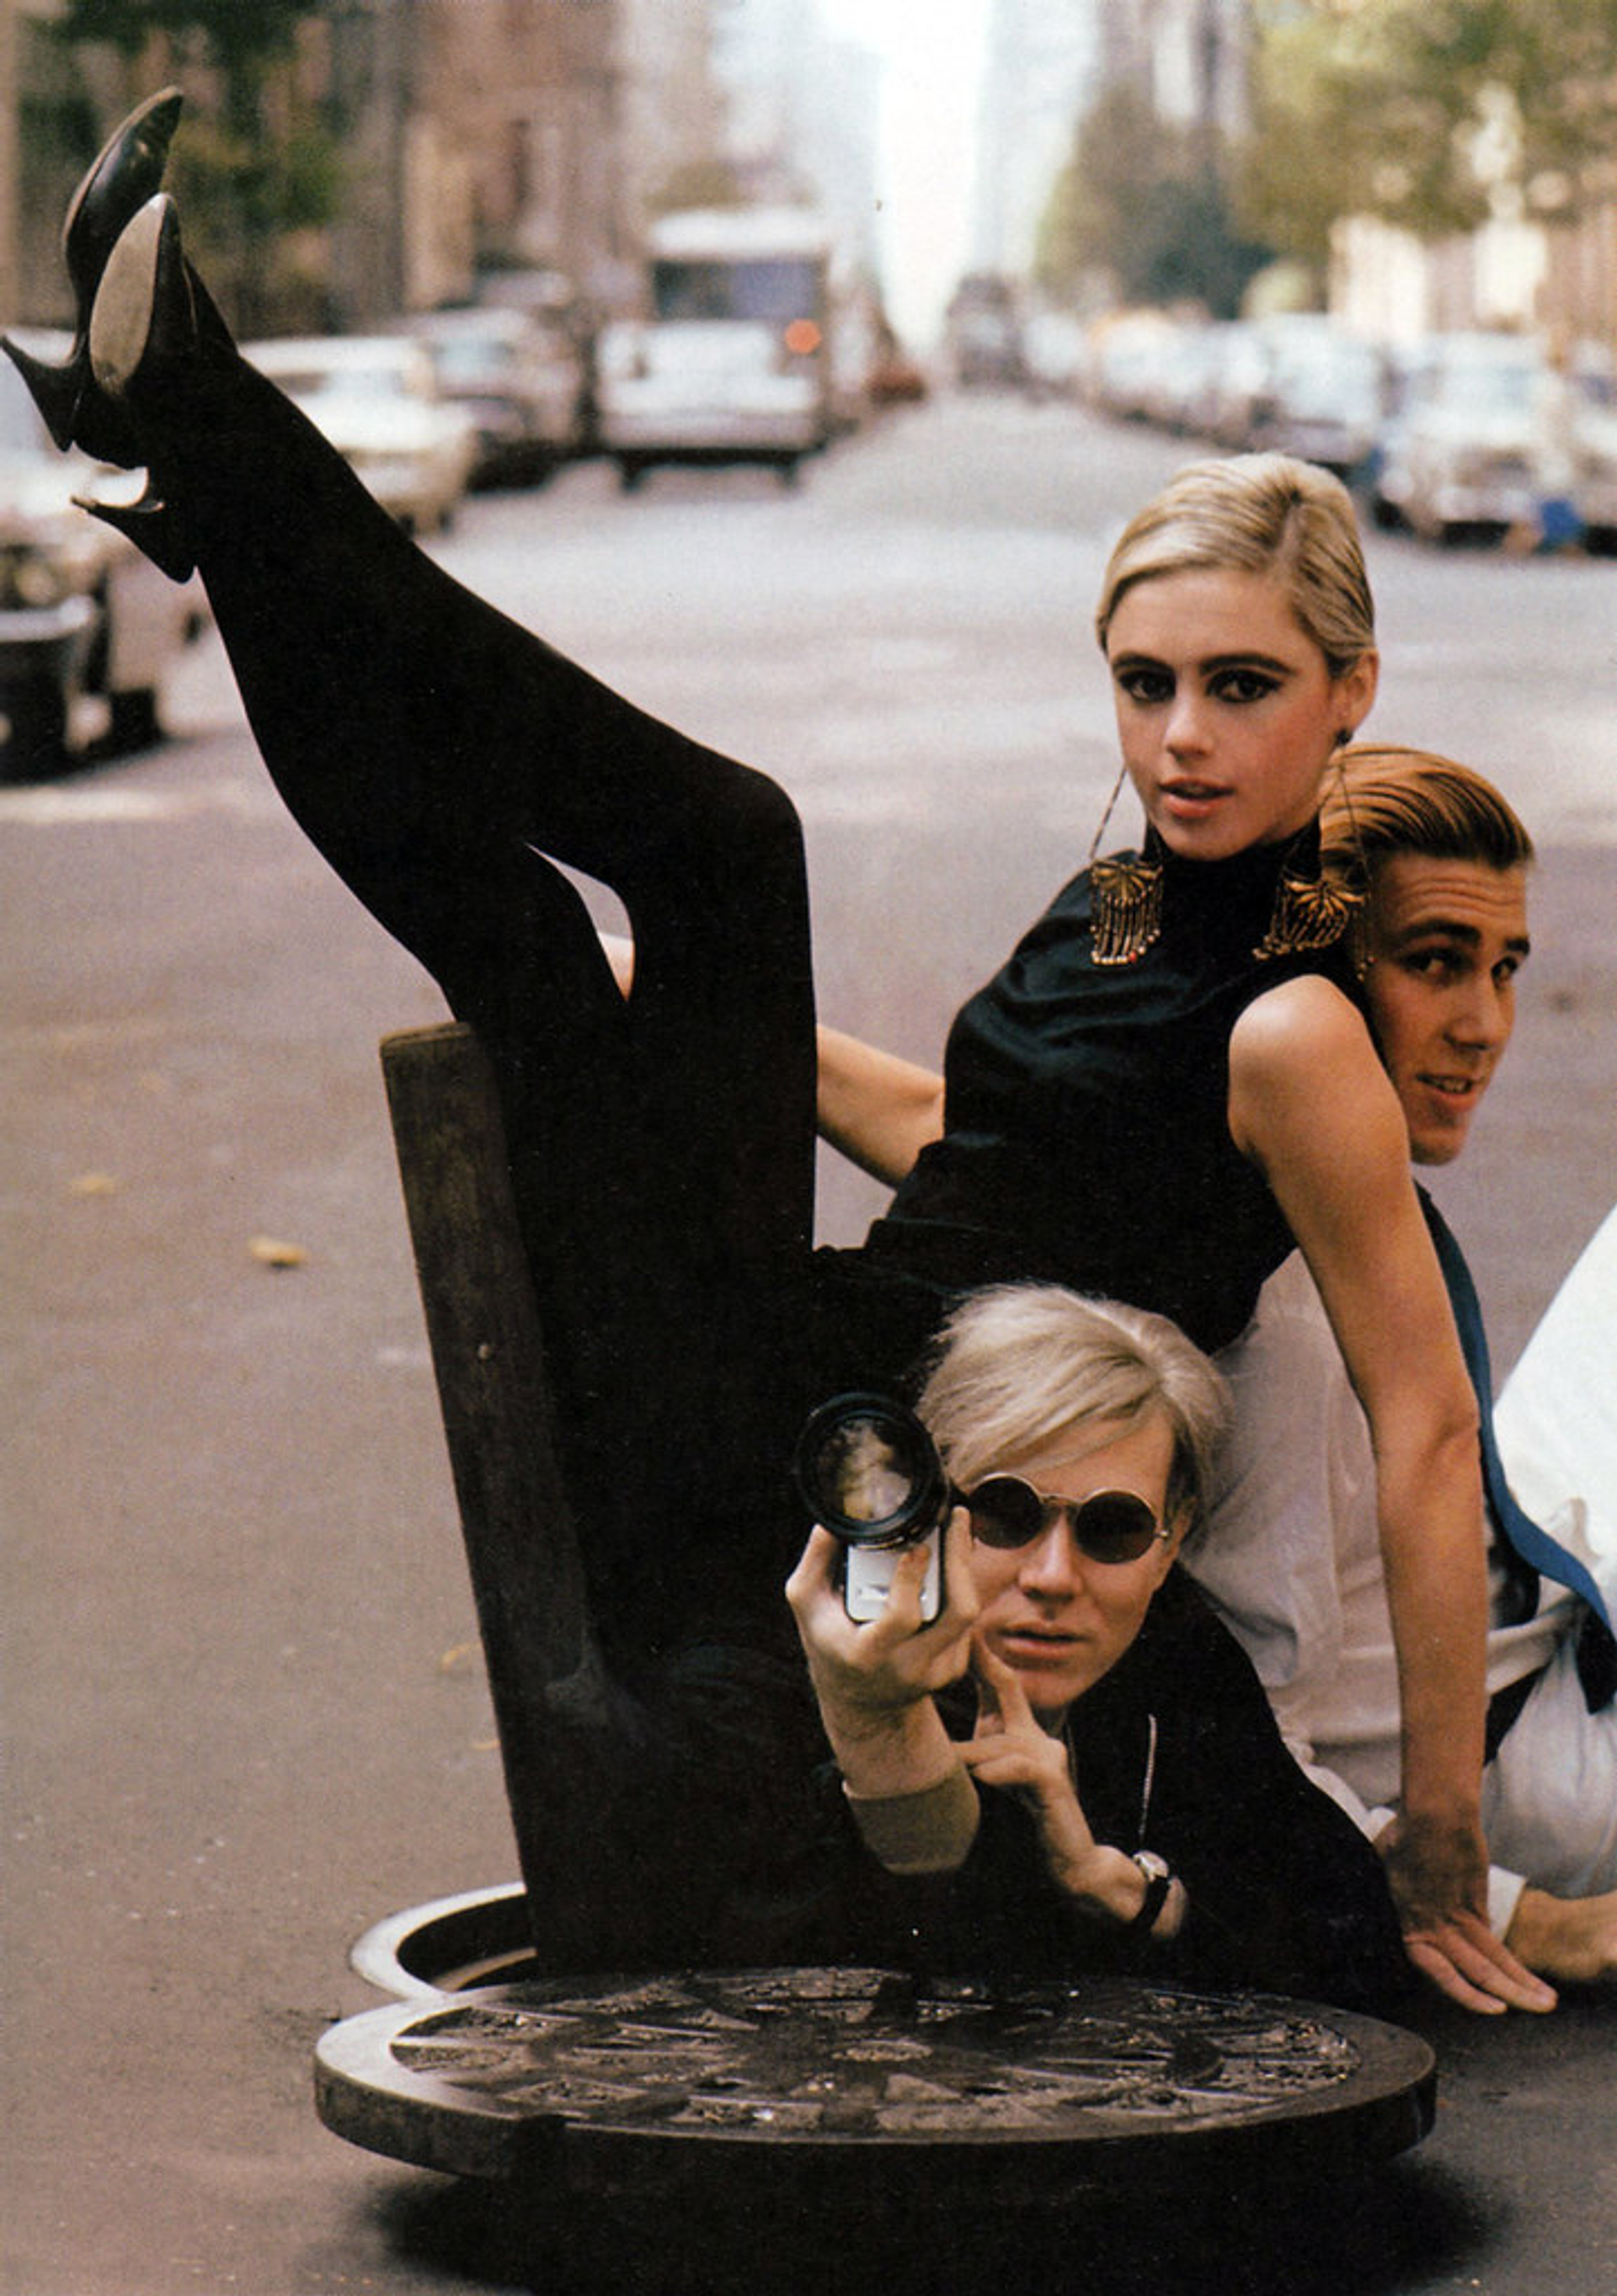 In this photograph, Andy Warhol is seen emerging from a sewer grating while holding a camera. Muse Edie Sedgwick is sitting over him, extending her long legs by her side and leaning against Chuck Wein.